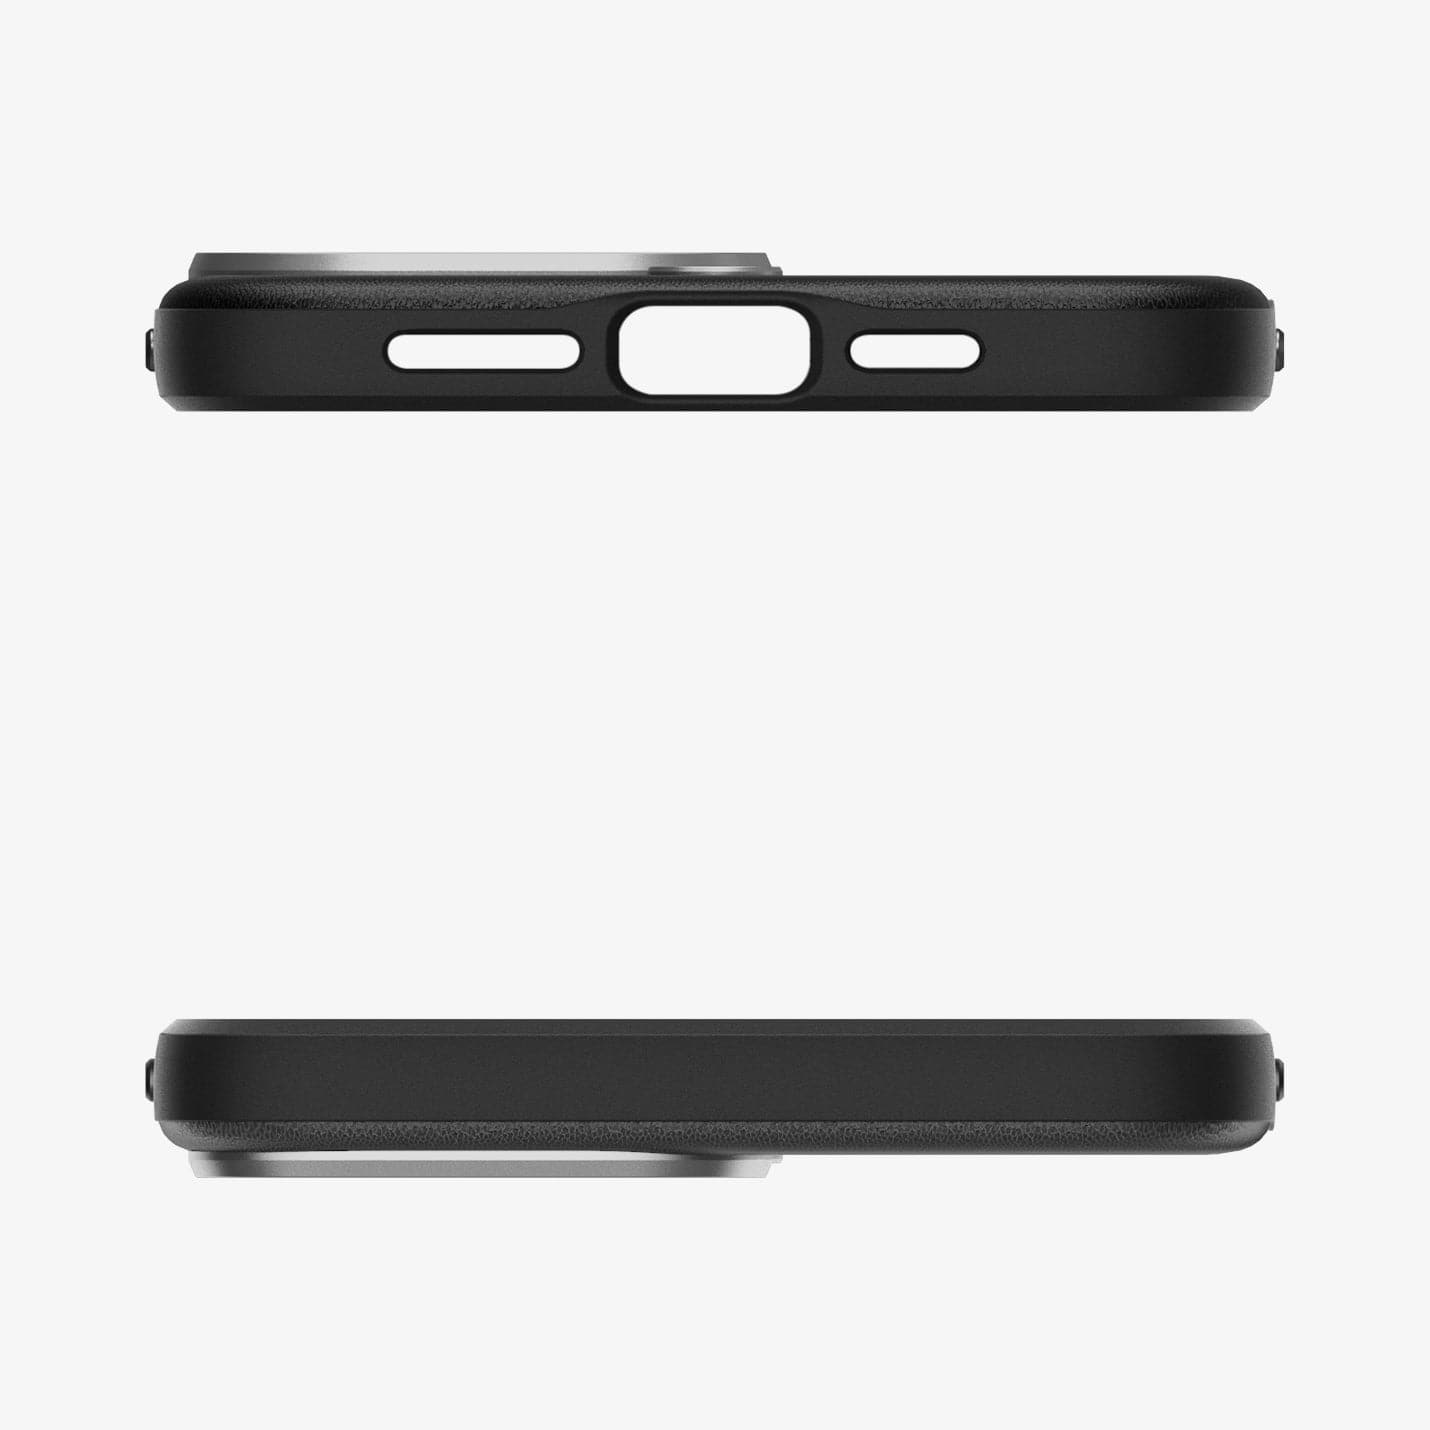 ACS03233 - iPhone 13 Pro Max Case Enzo in black showing the top and bottom with precise cutouts